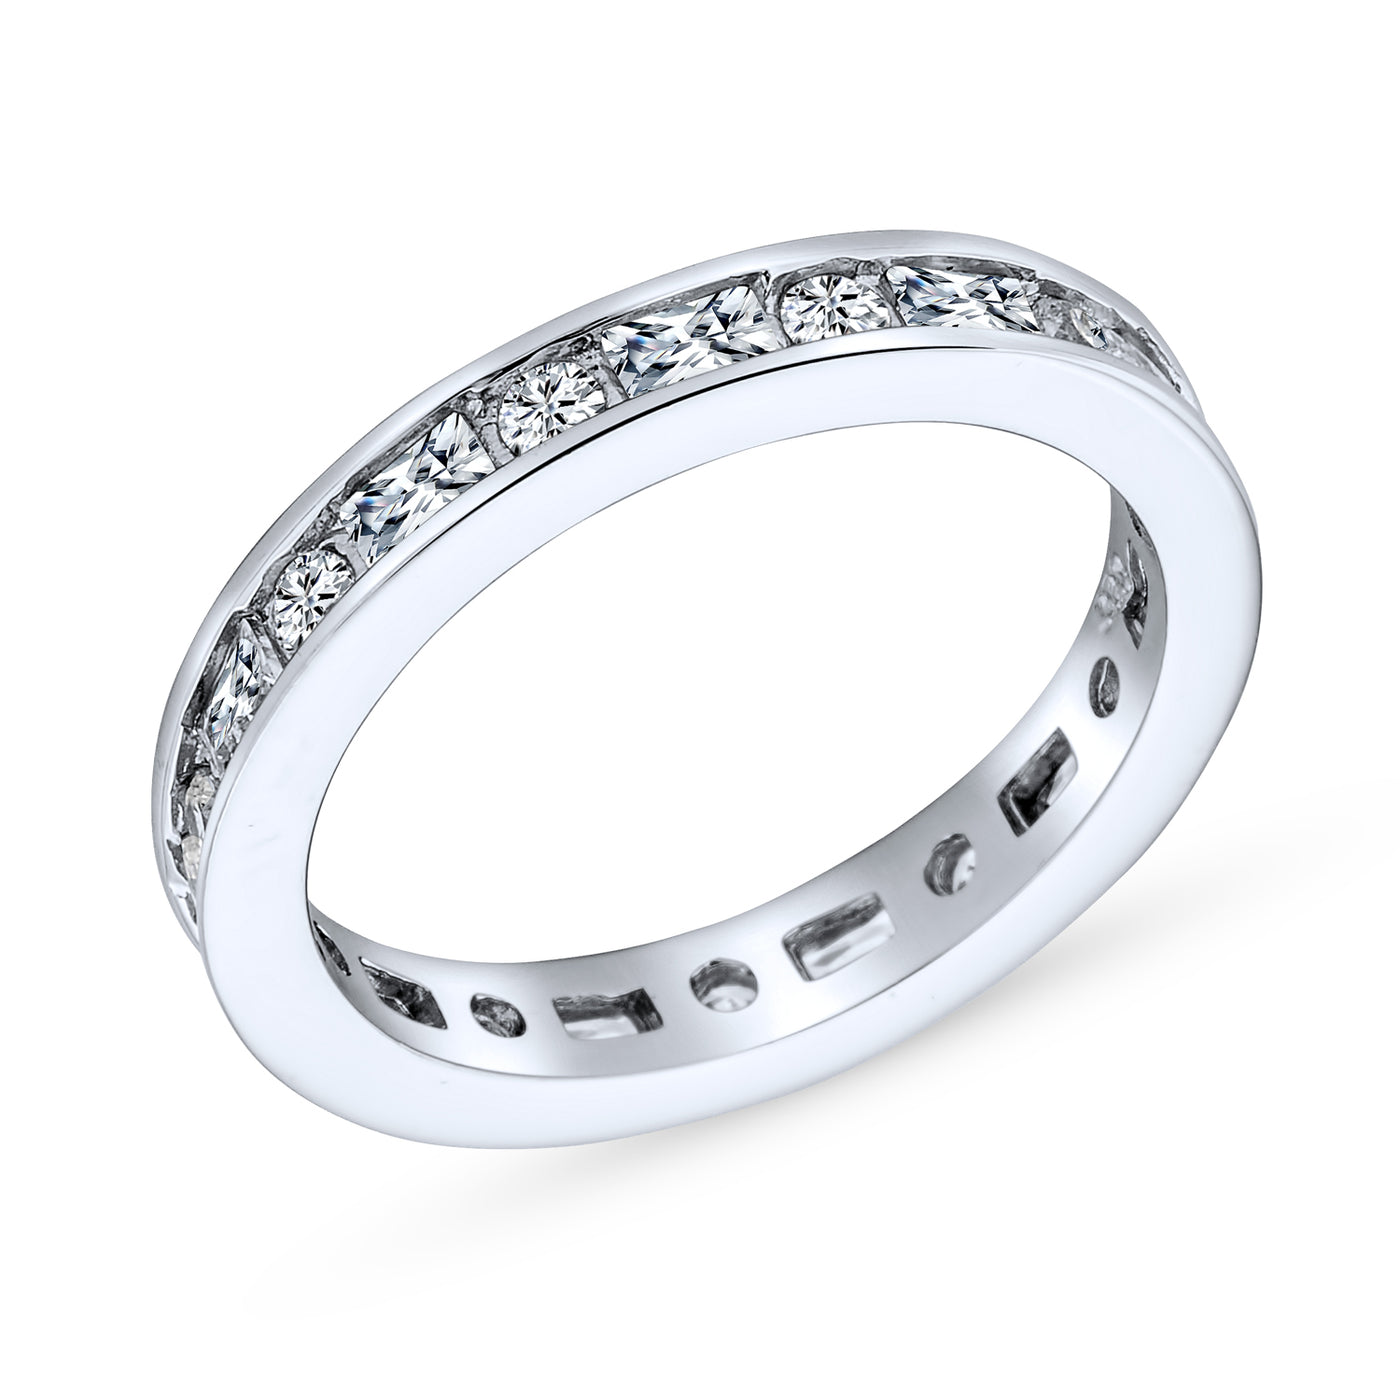 Thin Pave Baguette Eternity Wedding Band Ring .925 Sterling Silver 2MM